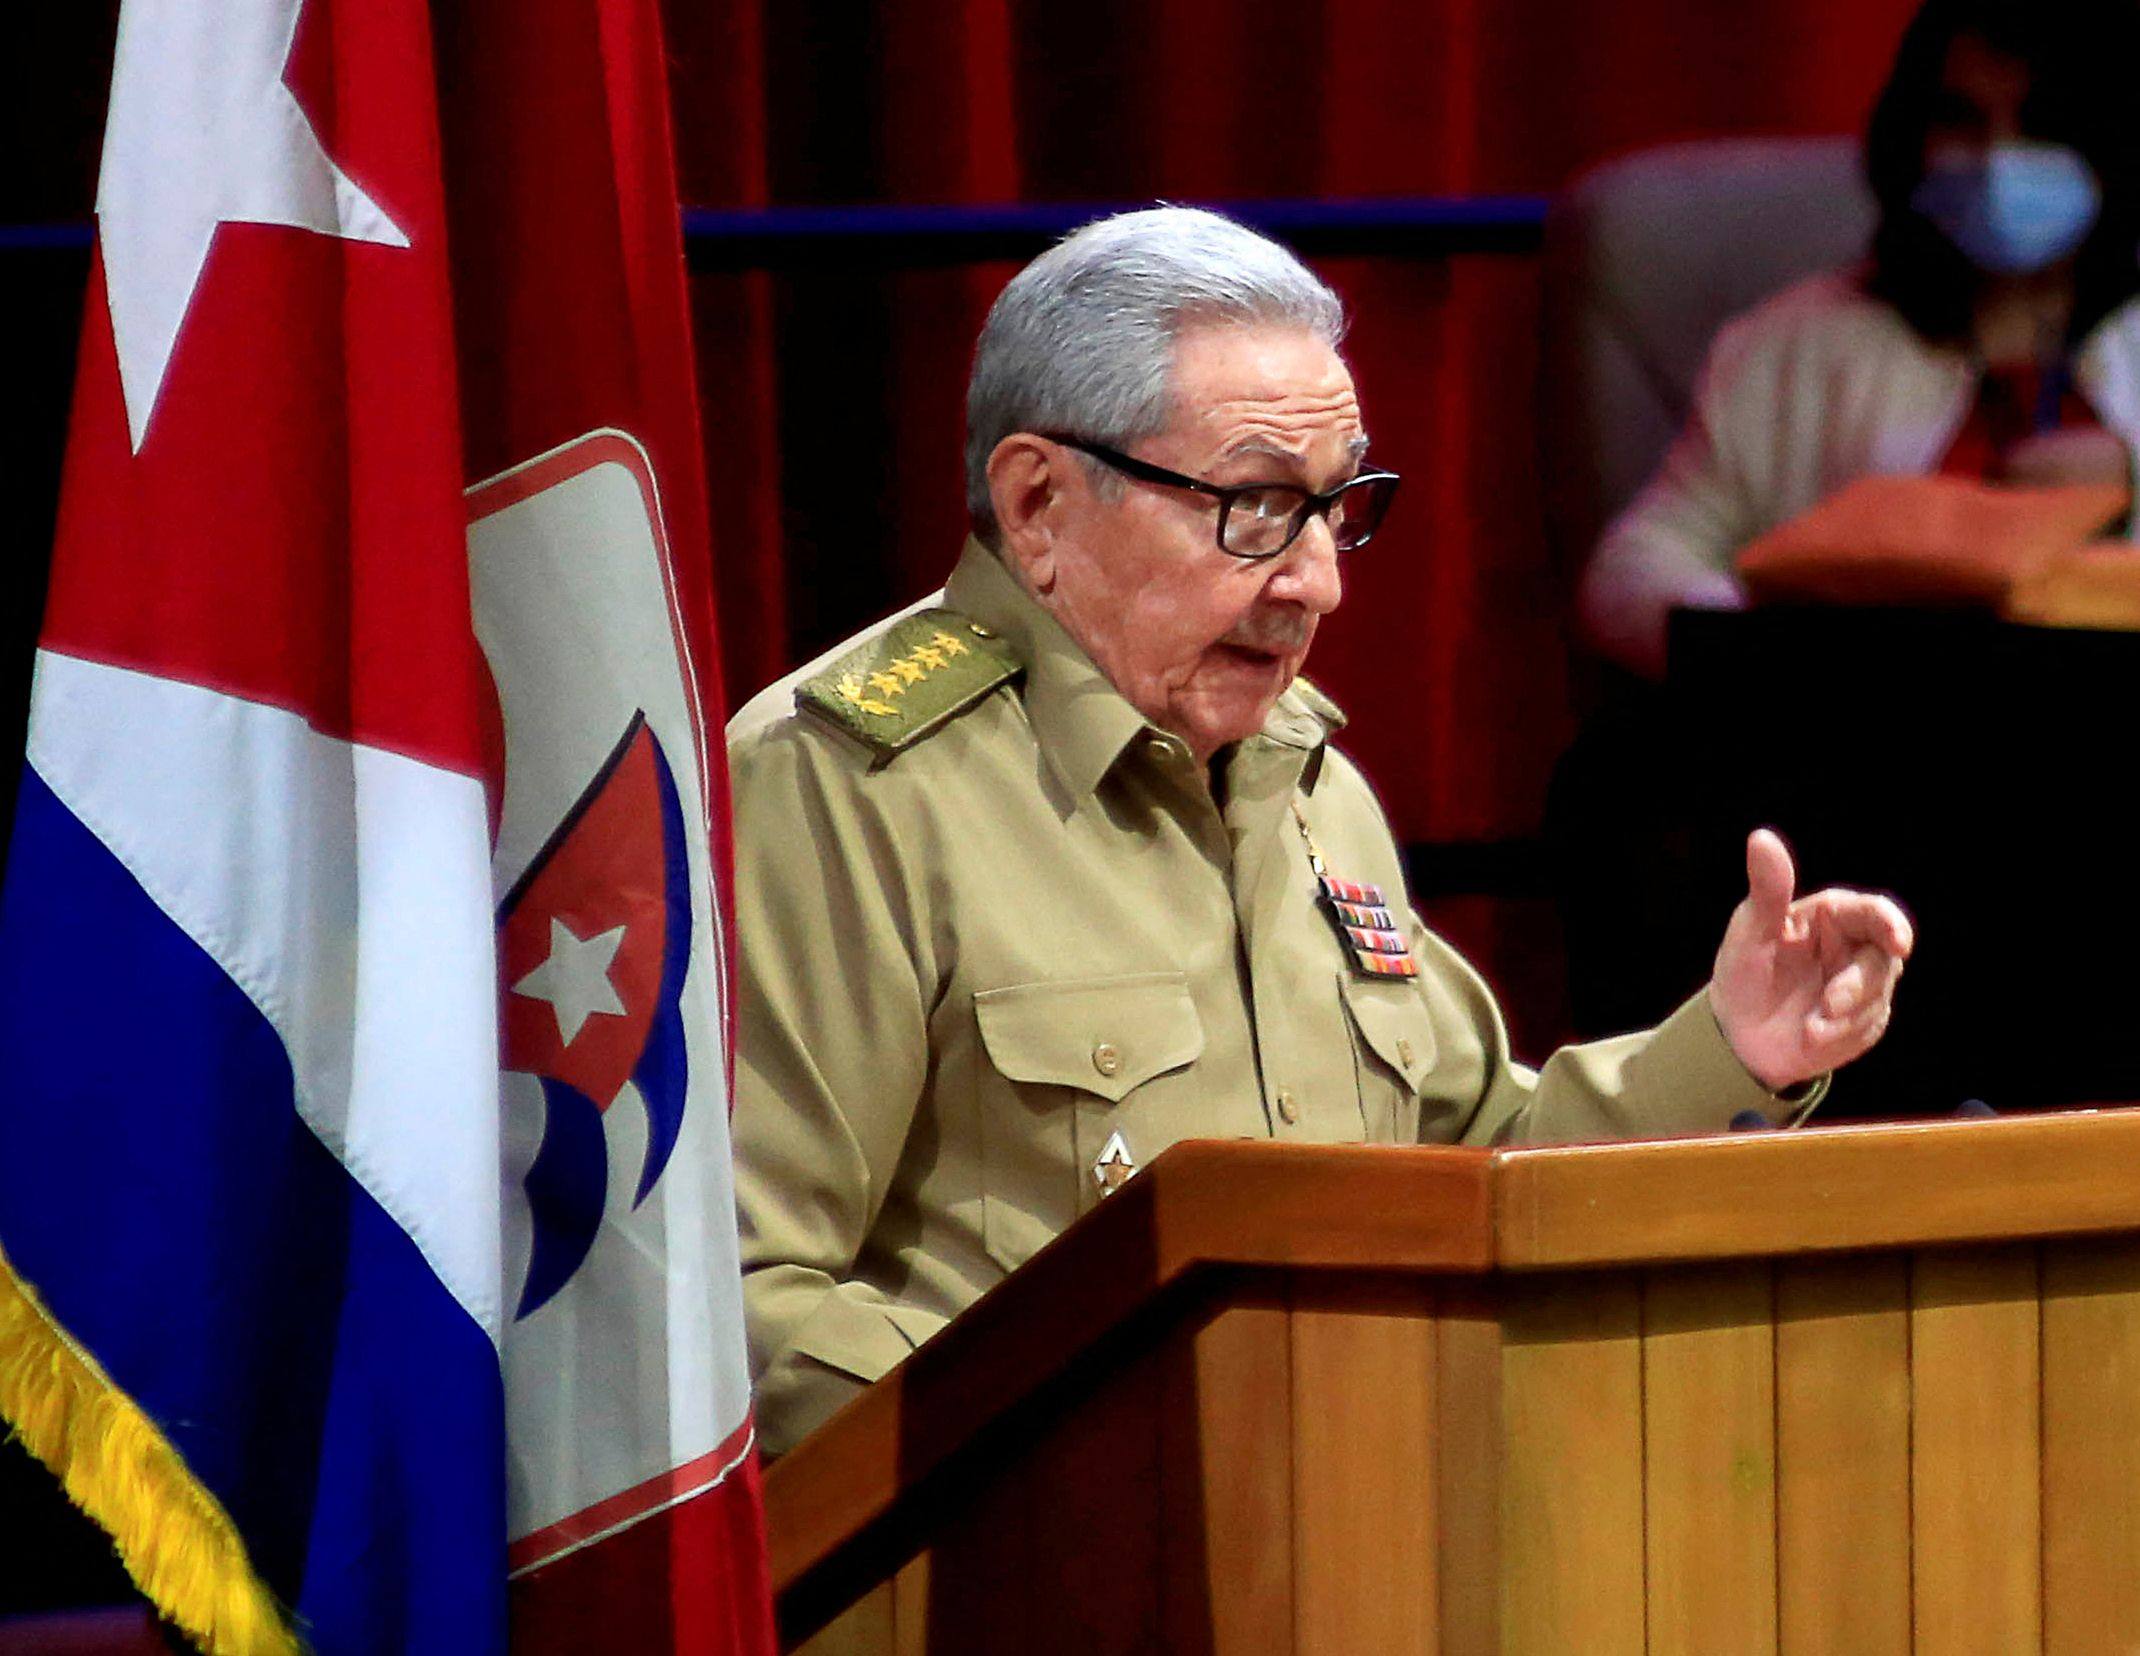 First Secretary Raul Castro speaks during the opening session of the eighth congress of the Cuban Communist Party in Havana on Friday. Photo: Cuban News Agency (ACN) via AFP